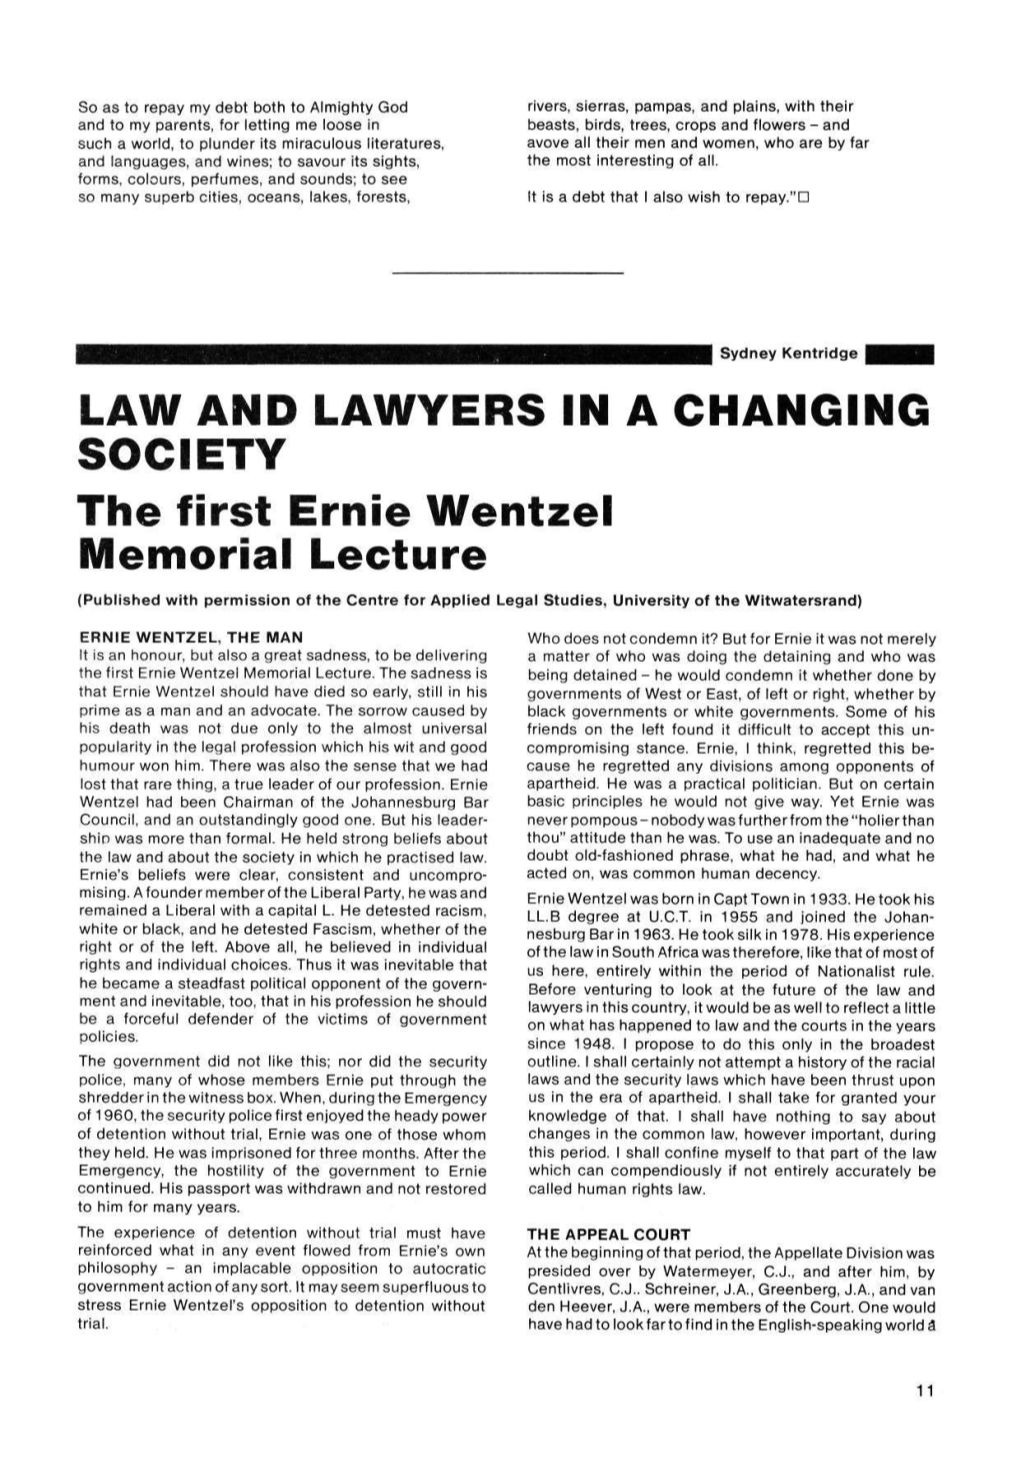 LAW and LAWYERS in a CHANGING SOCIETY the First Ernie Wentzel Memorial Lecture